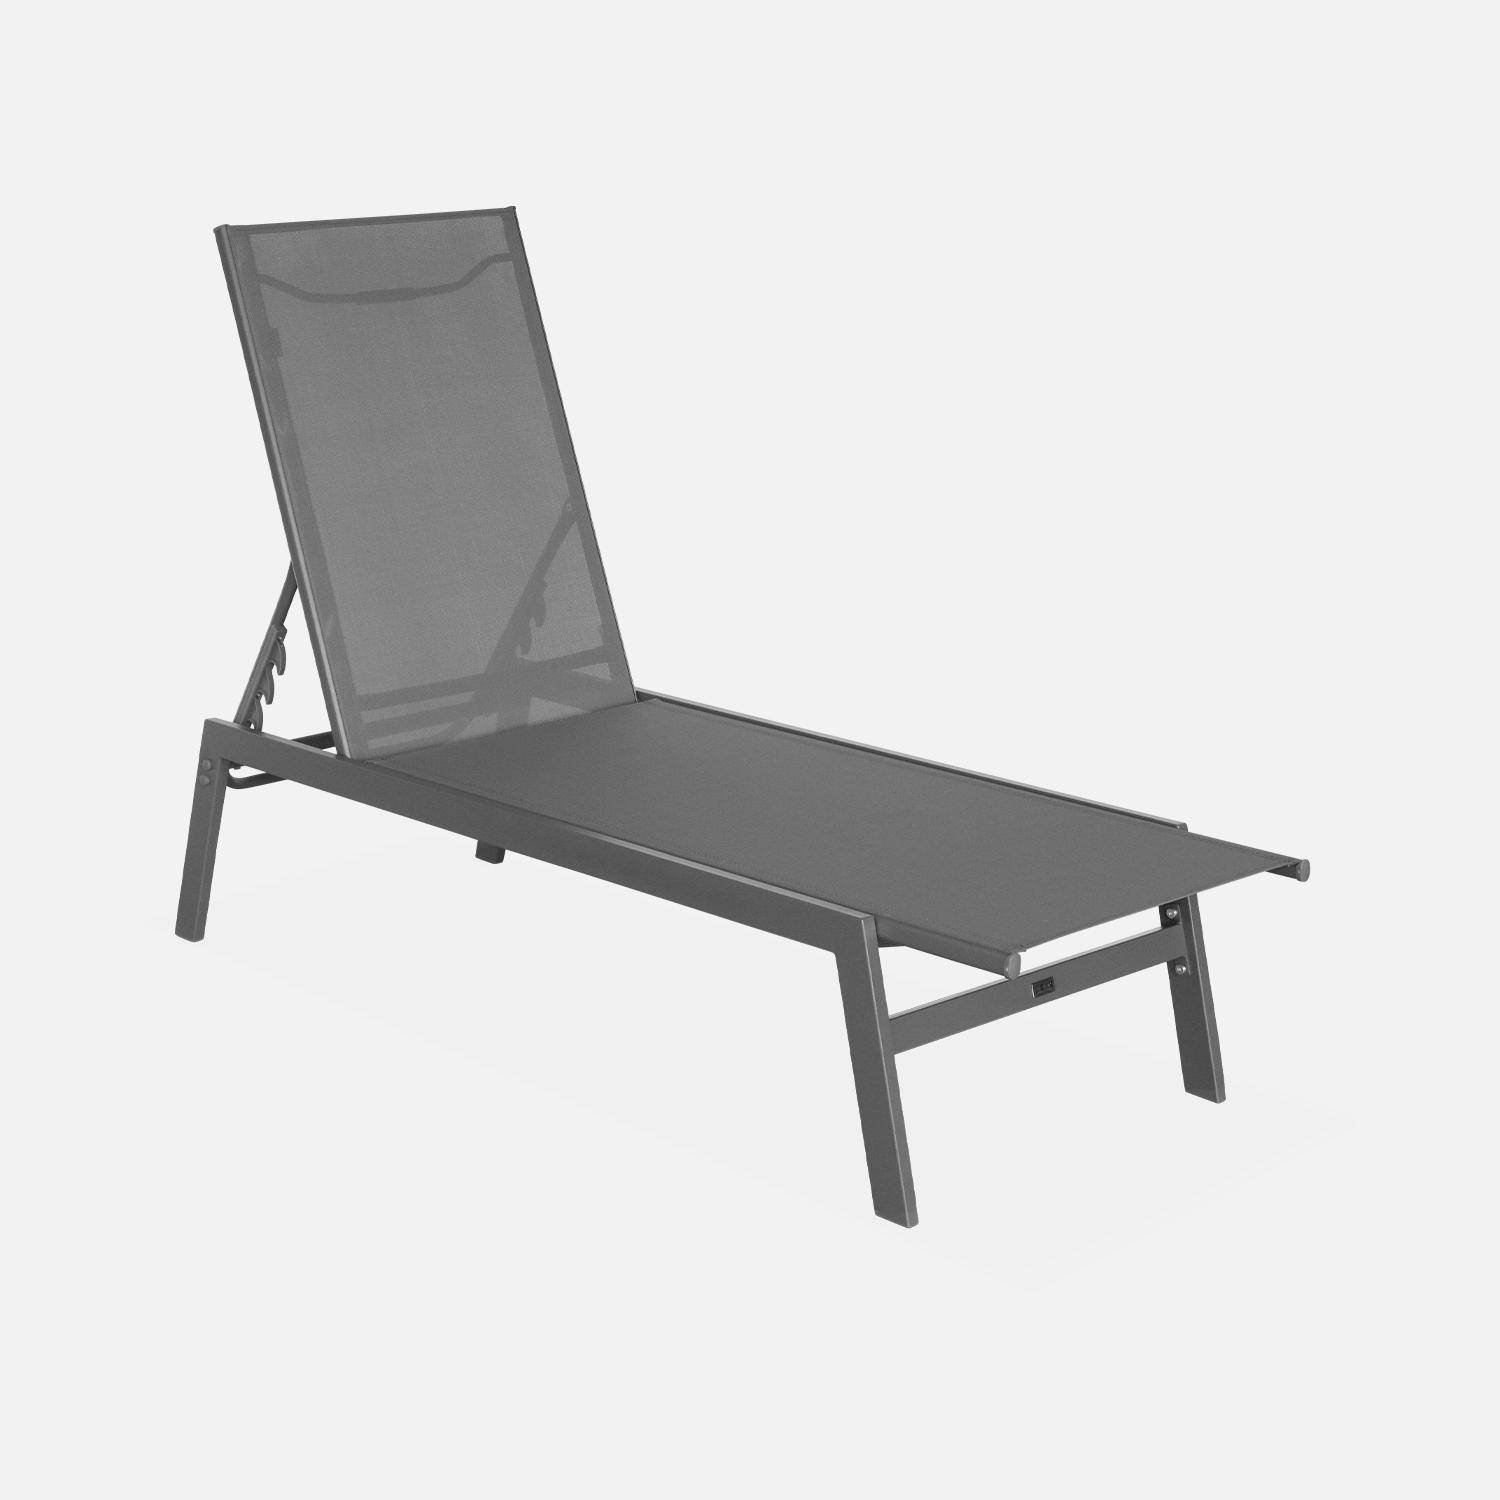 Pair of Textilene and Metal Multi-Position Sun Loungers, Anthracite Photo4